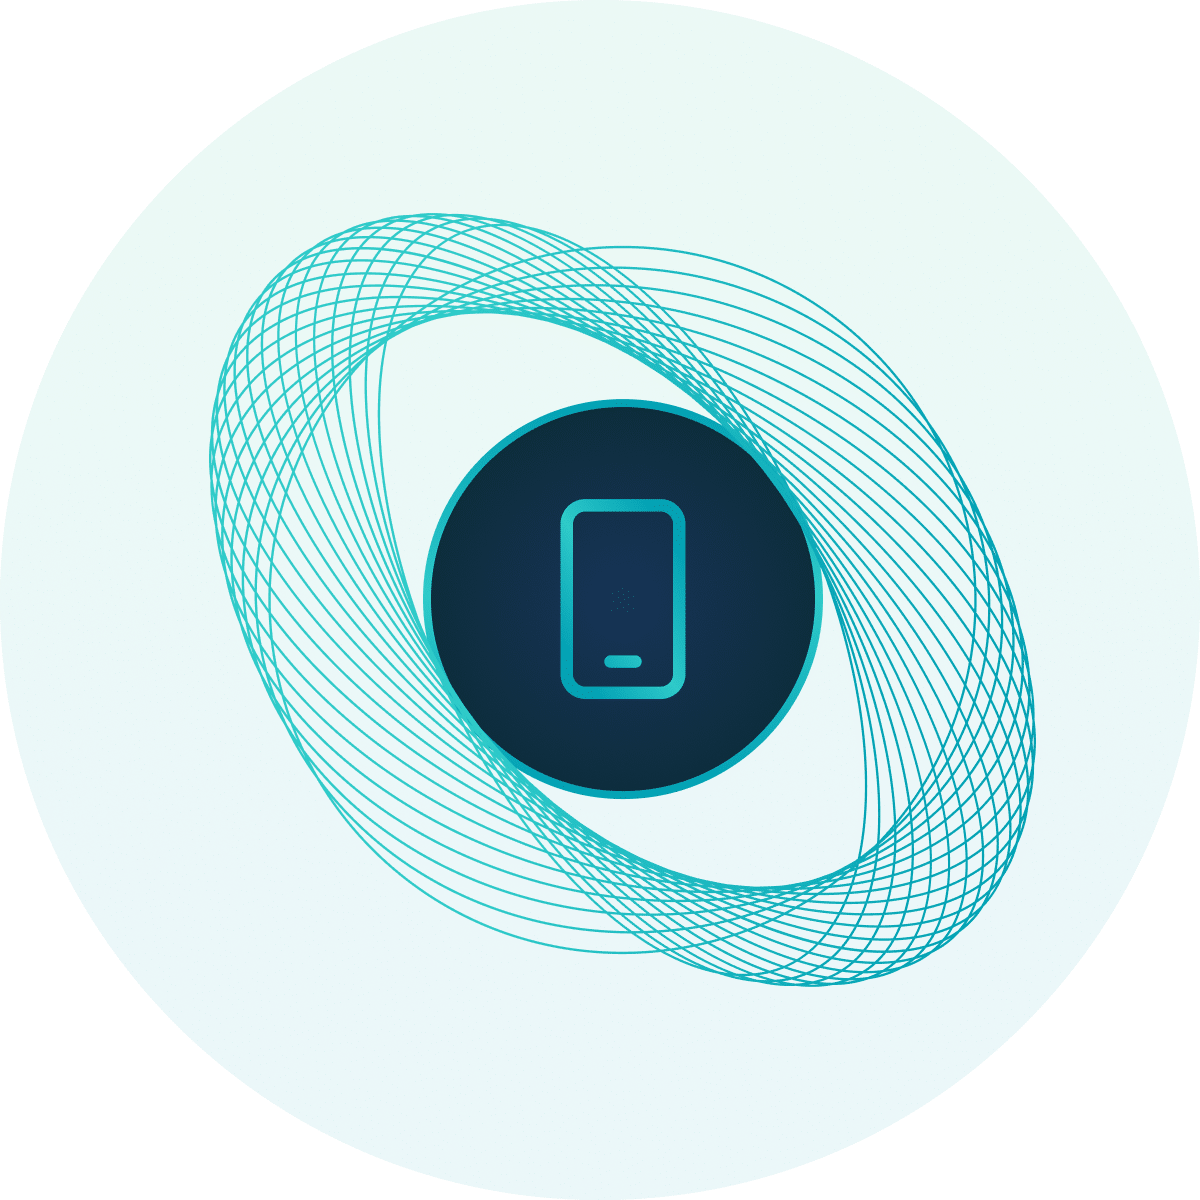 restrata-connected-resilience-platform-travel-journey-management-mobile-phone-icon